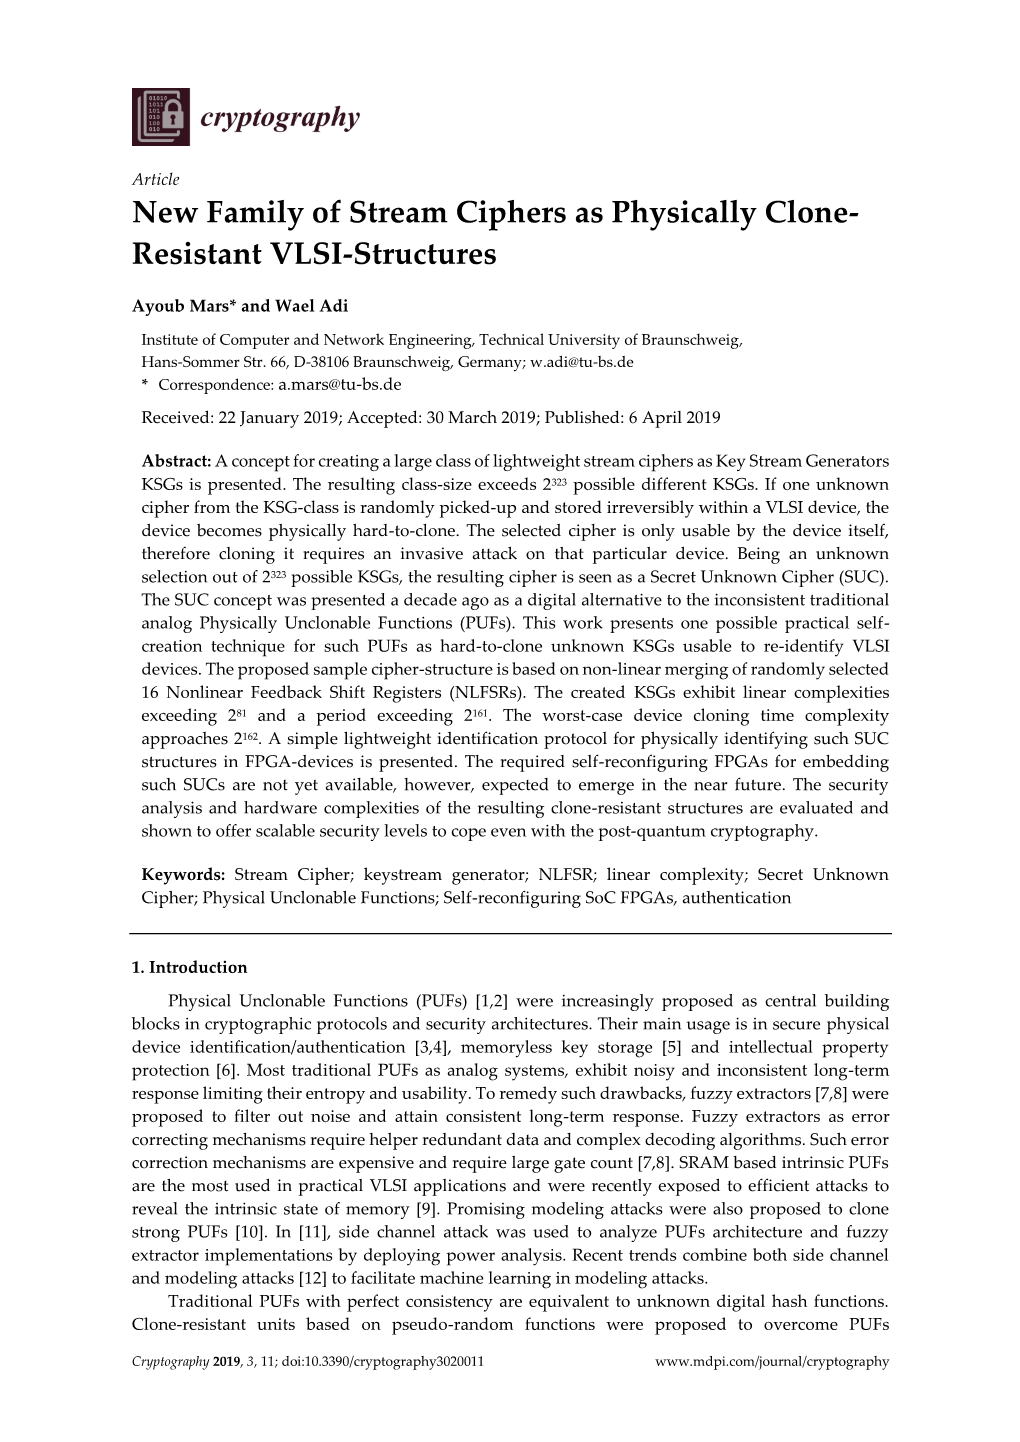 New Family of Stream Ciphers As Physically Clone- Resistant VLSI-Structures